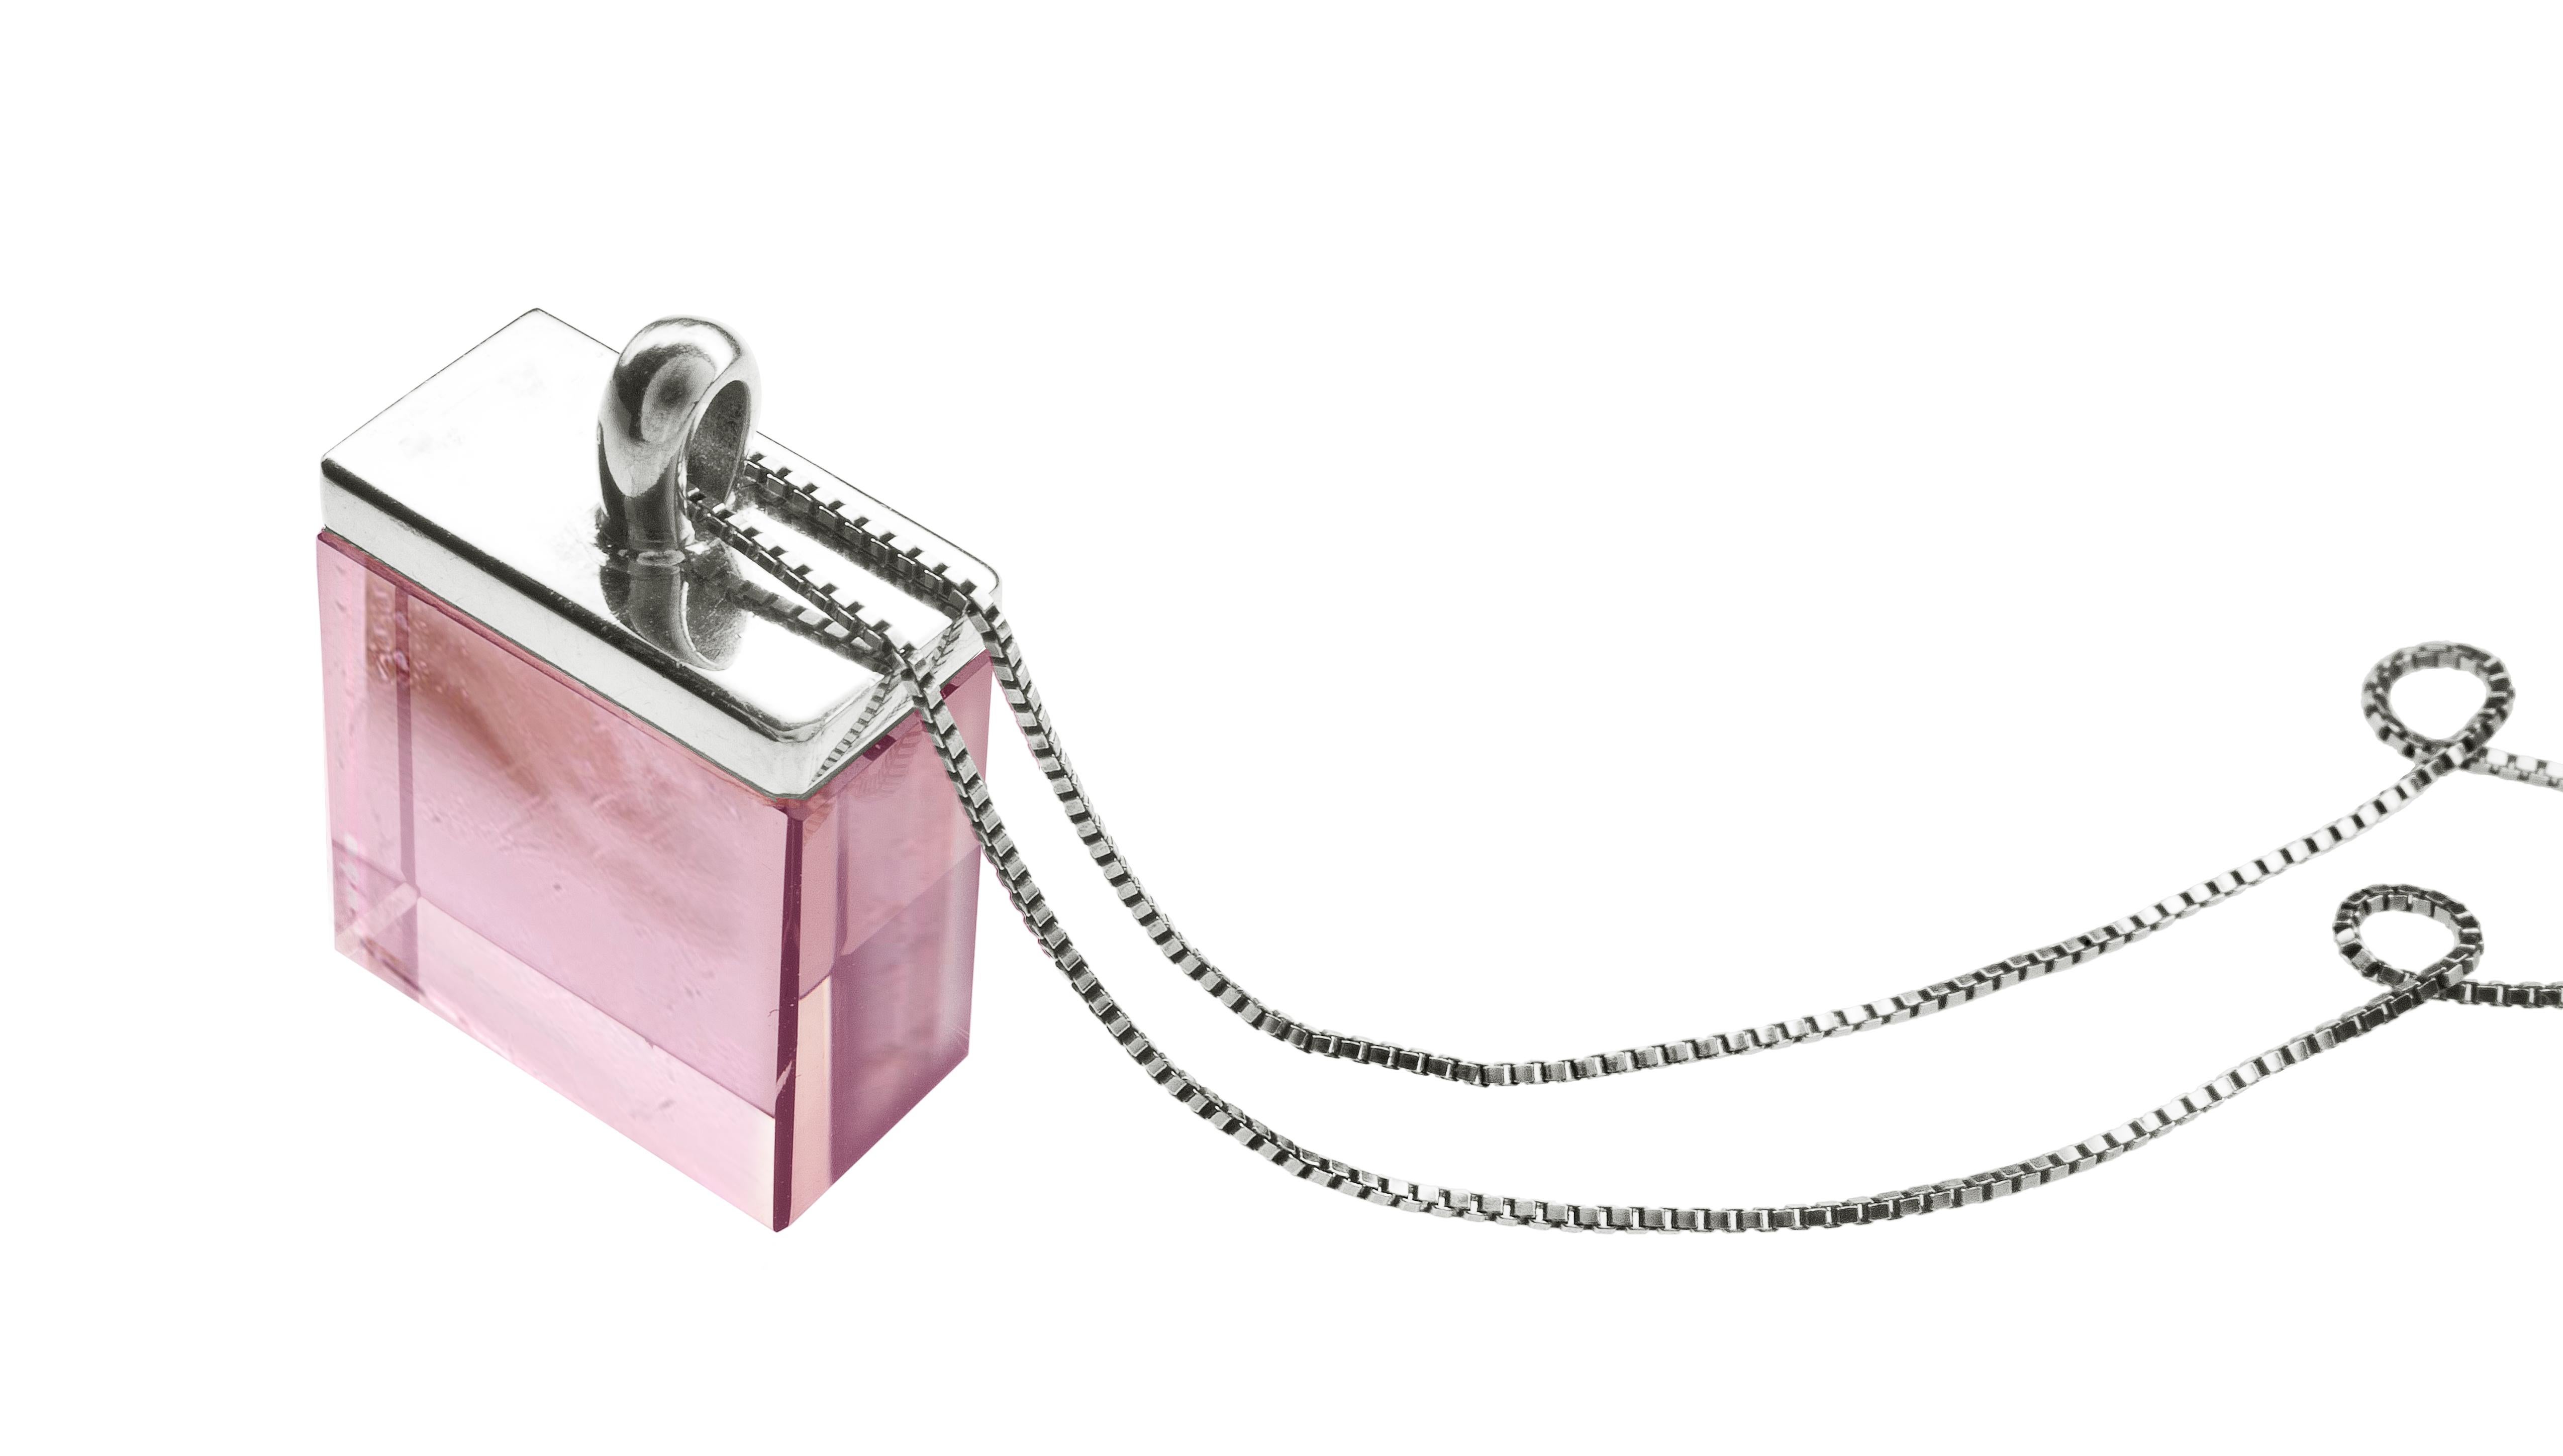 This contemporary pendant necklace features a 15x15x8 mm natural untreated pink tourmaline cut specifically for the artist by the oldest company in Germany, in the market since the 19th century. The pendant belongs to a collection that was featured